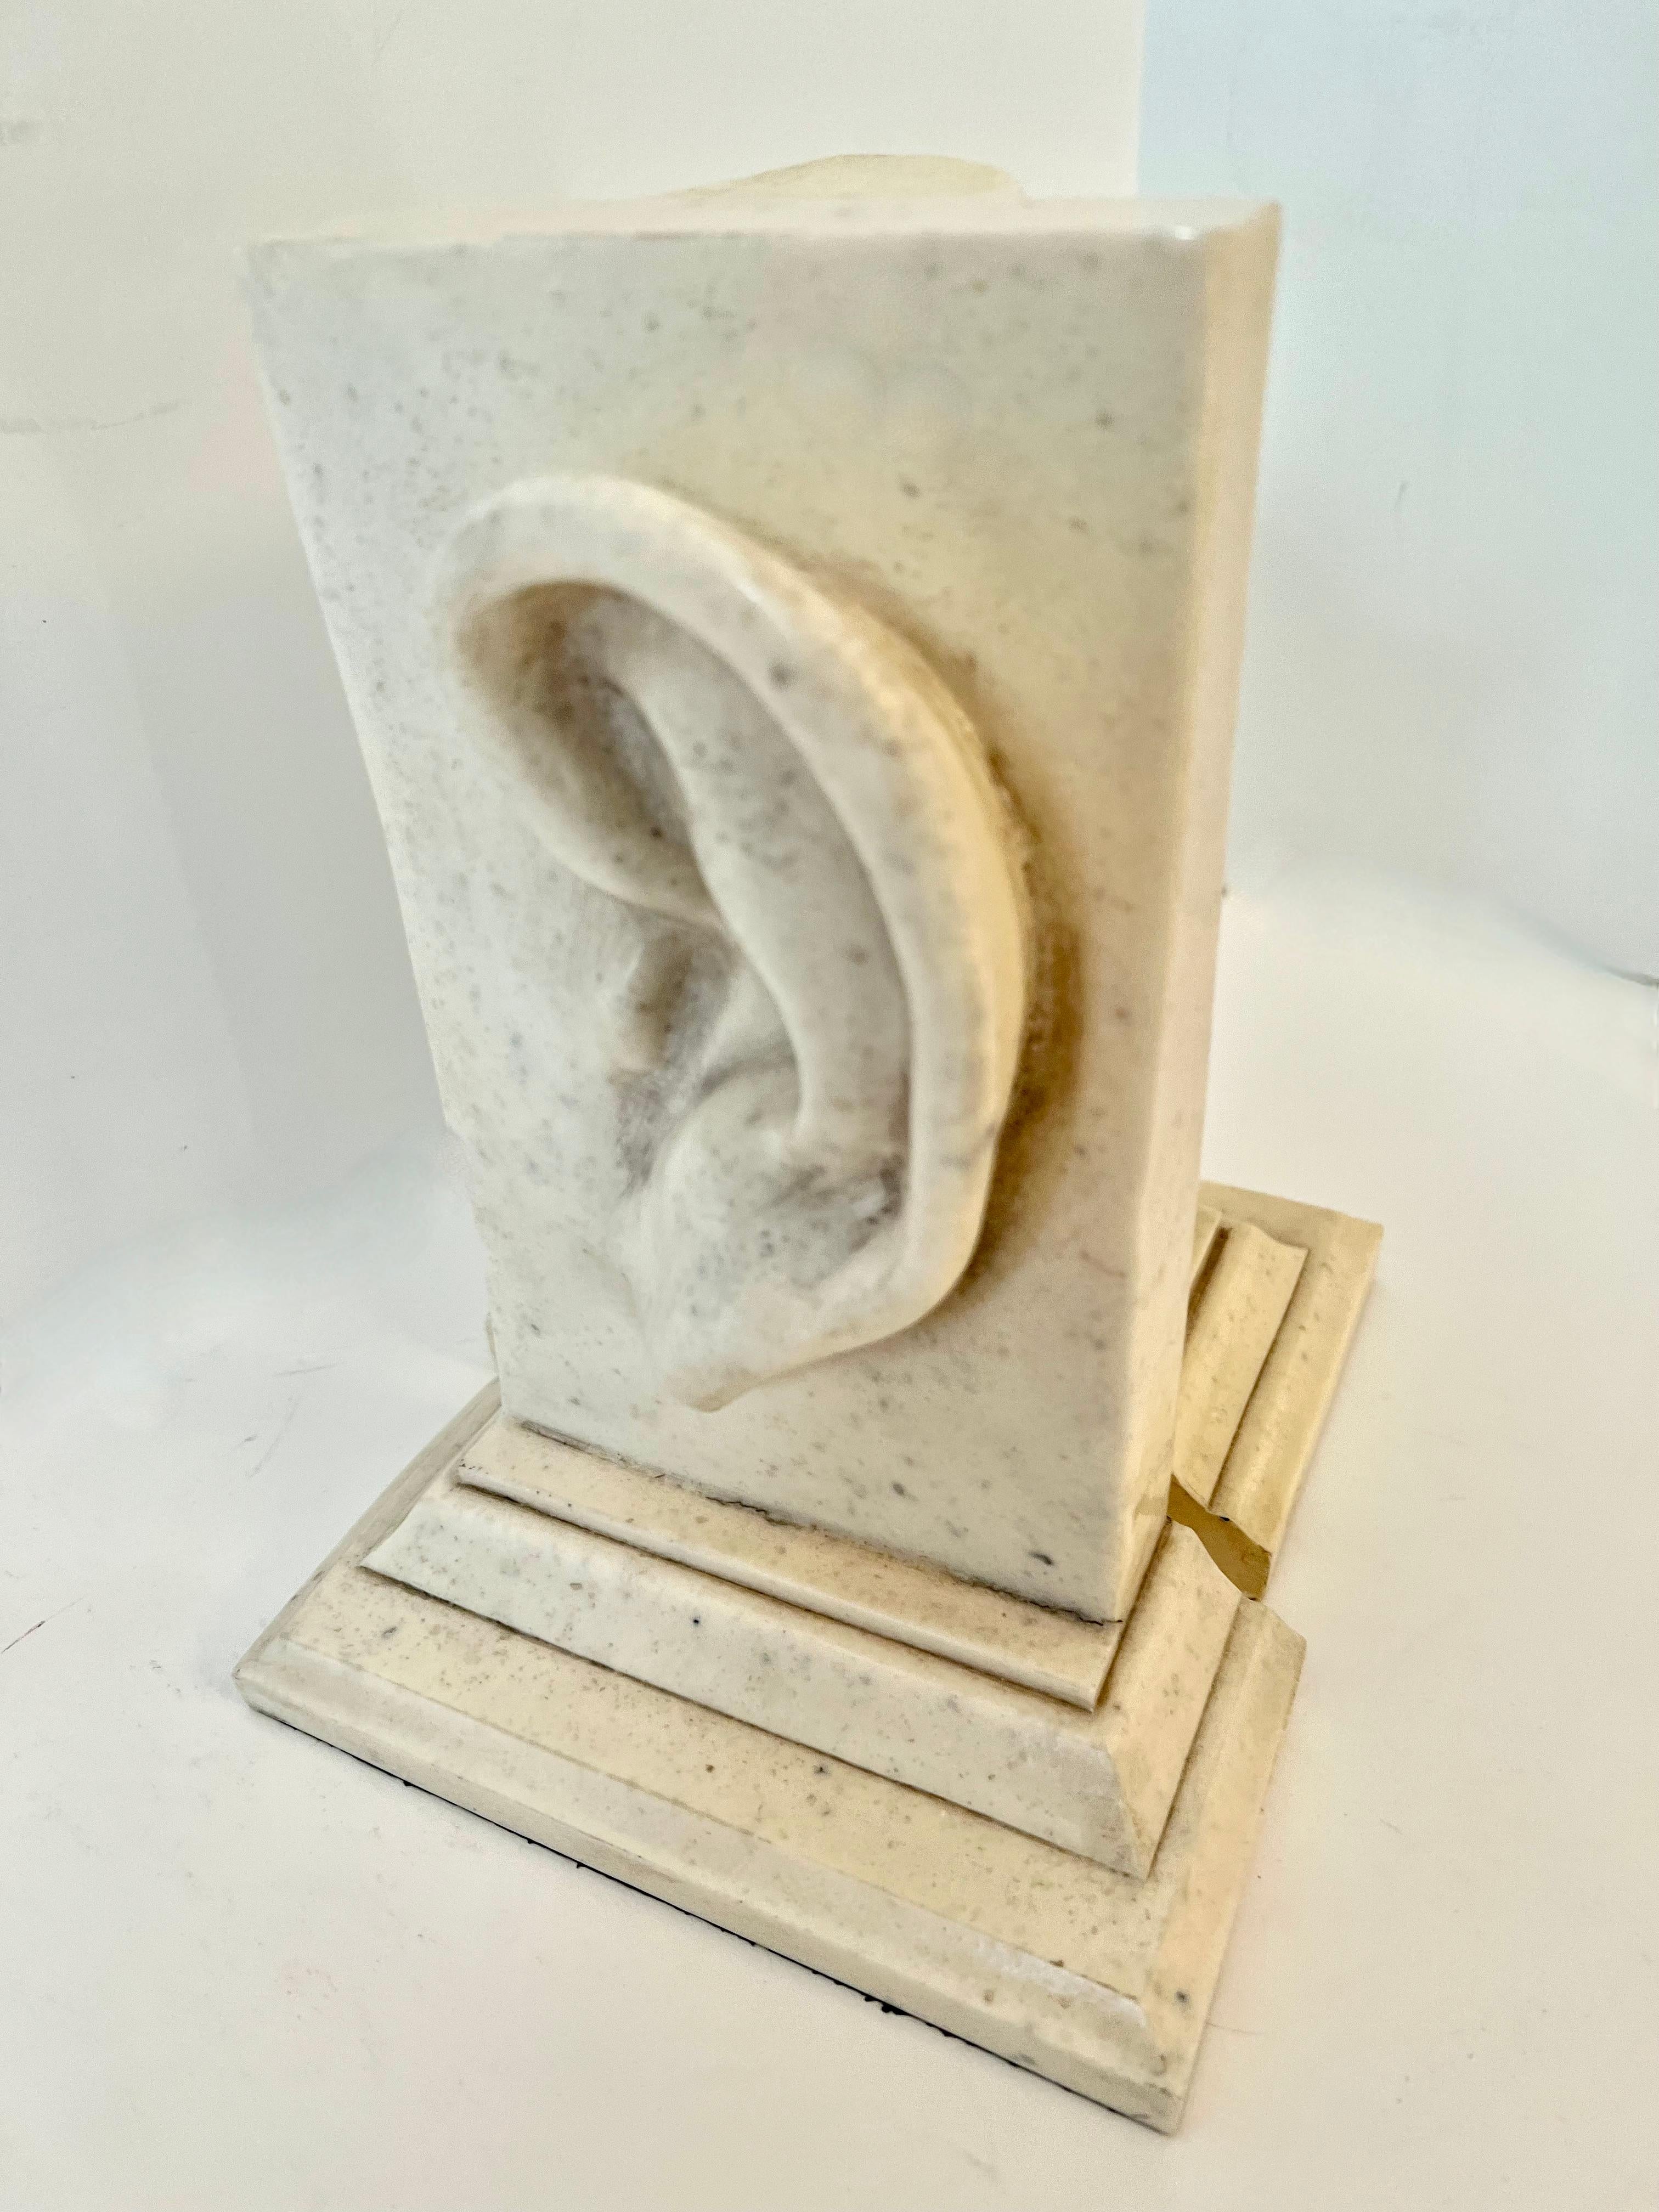 Pair of C2C Designs, a Resin Based Sculptural Ear and Nose Bookend Set For Sale 2